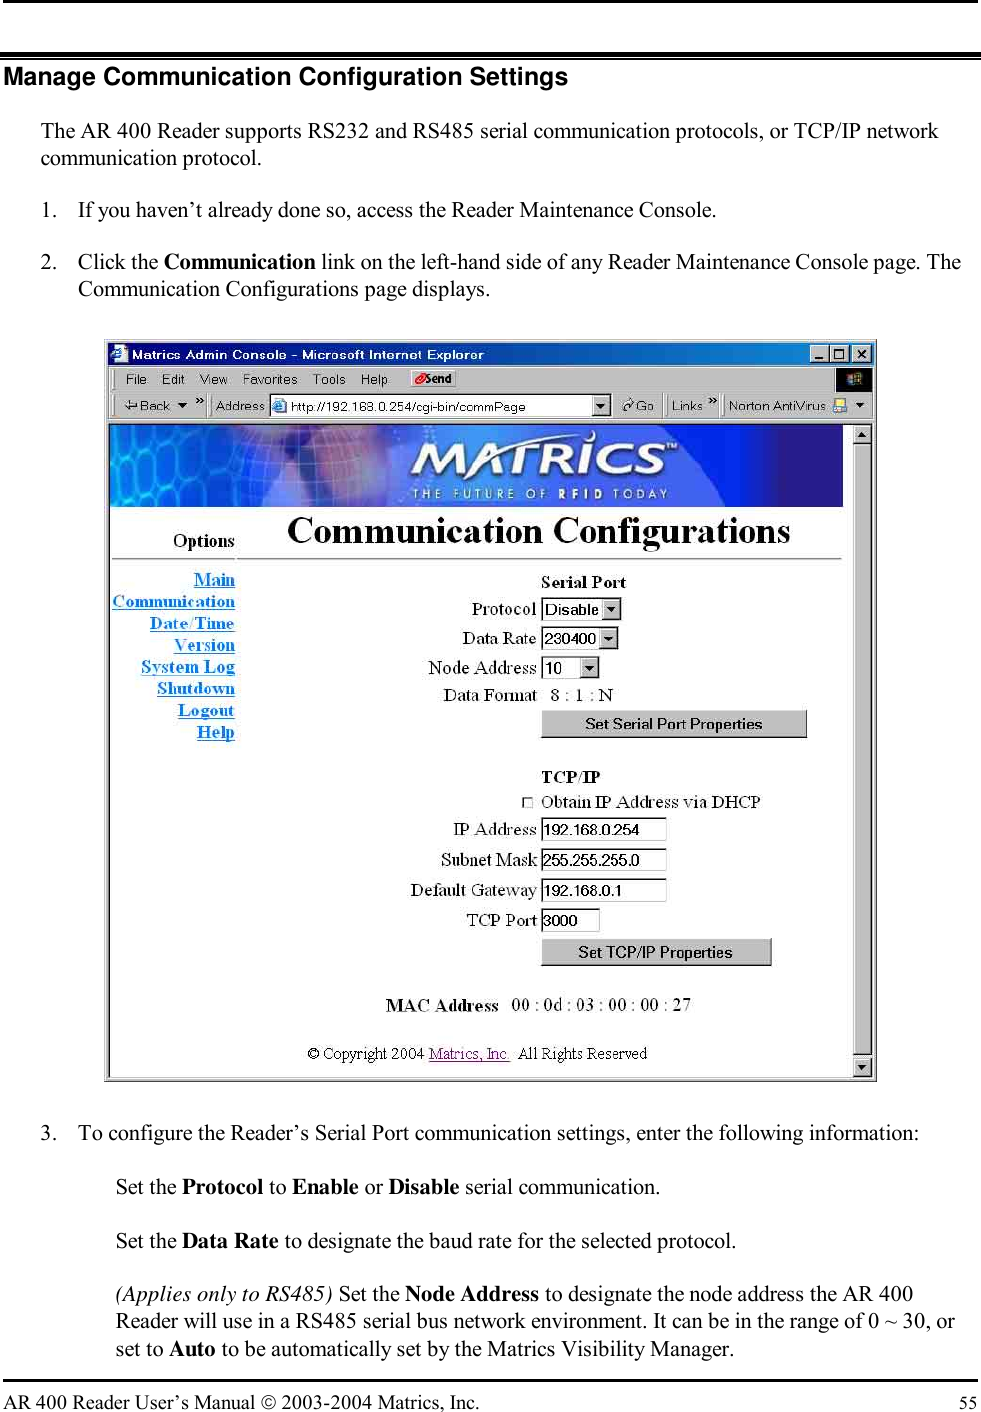   AR 400 Reader User’s Manual  2003-2004 Matrics, Inc.  55 Manage Communication Configuration Settings The AR 400 Reader supports RS232 and RS485 serial communication protocols, or TCP/IP network communication protocol.  1.  If you haven’t already done so, access the Reader Maintenance Console. 2. Click the Communication link on the left-hand side of any Reader Maintenance Console page. The Communication Configurations page displays.  3.  To configure the Reader’s Serial Port communication settings, enter the following information:   Set the Protocol to Enable or Disable serial communication.   Set the Data Rate to designate the baud rate for the selected protocol.   (Applies only to RS485) Set the Node Address to designate the node address the AR 400 Reader will use in a RS485 serial bus network environment. It can be in the range of 0 ~ 30, or set to Auto to be automatically set by the Matrics Visibility Manager. 